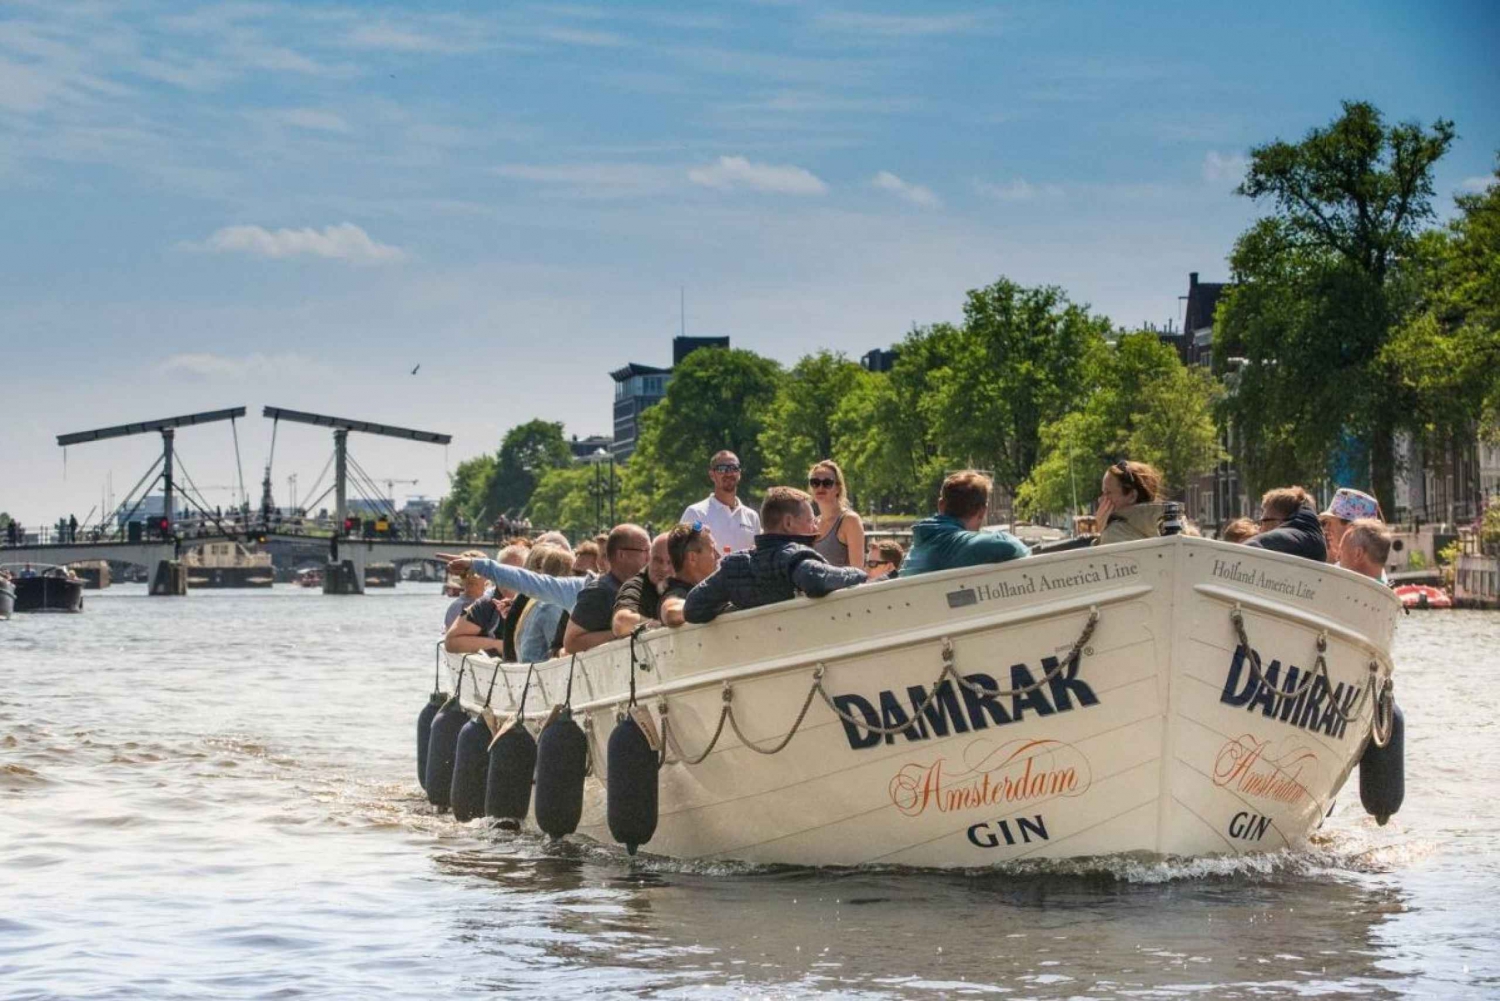 Amsterdam open boat cruise and Amsterdam Nightlife Ticket